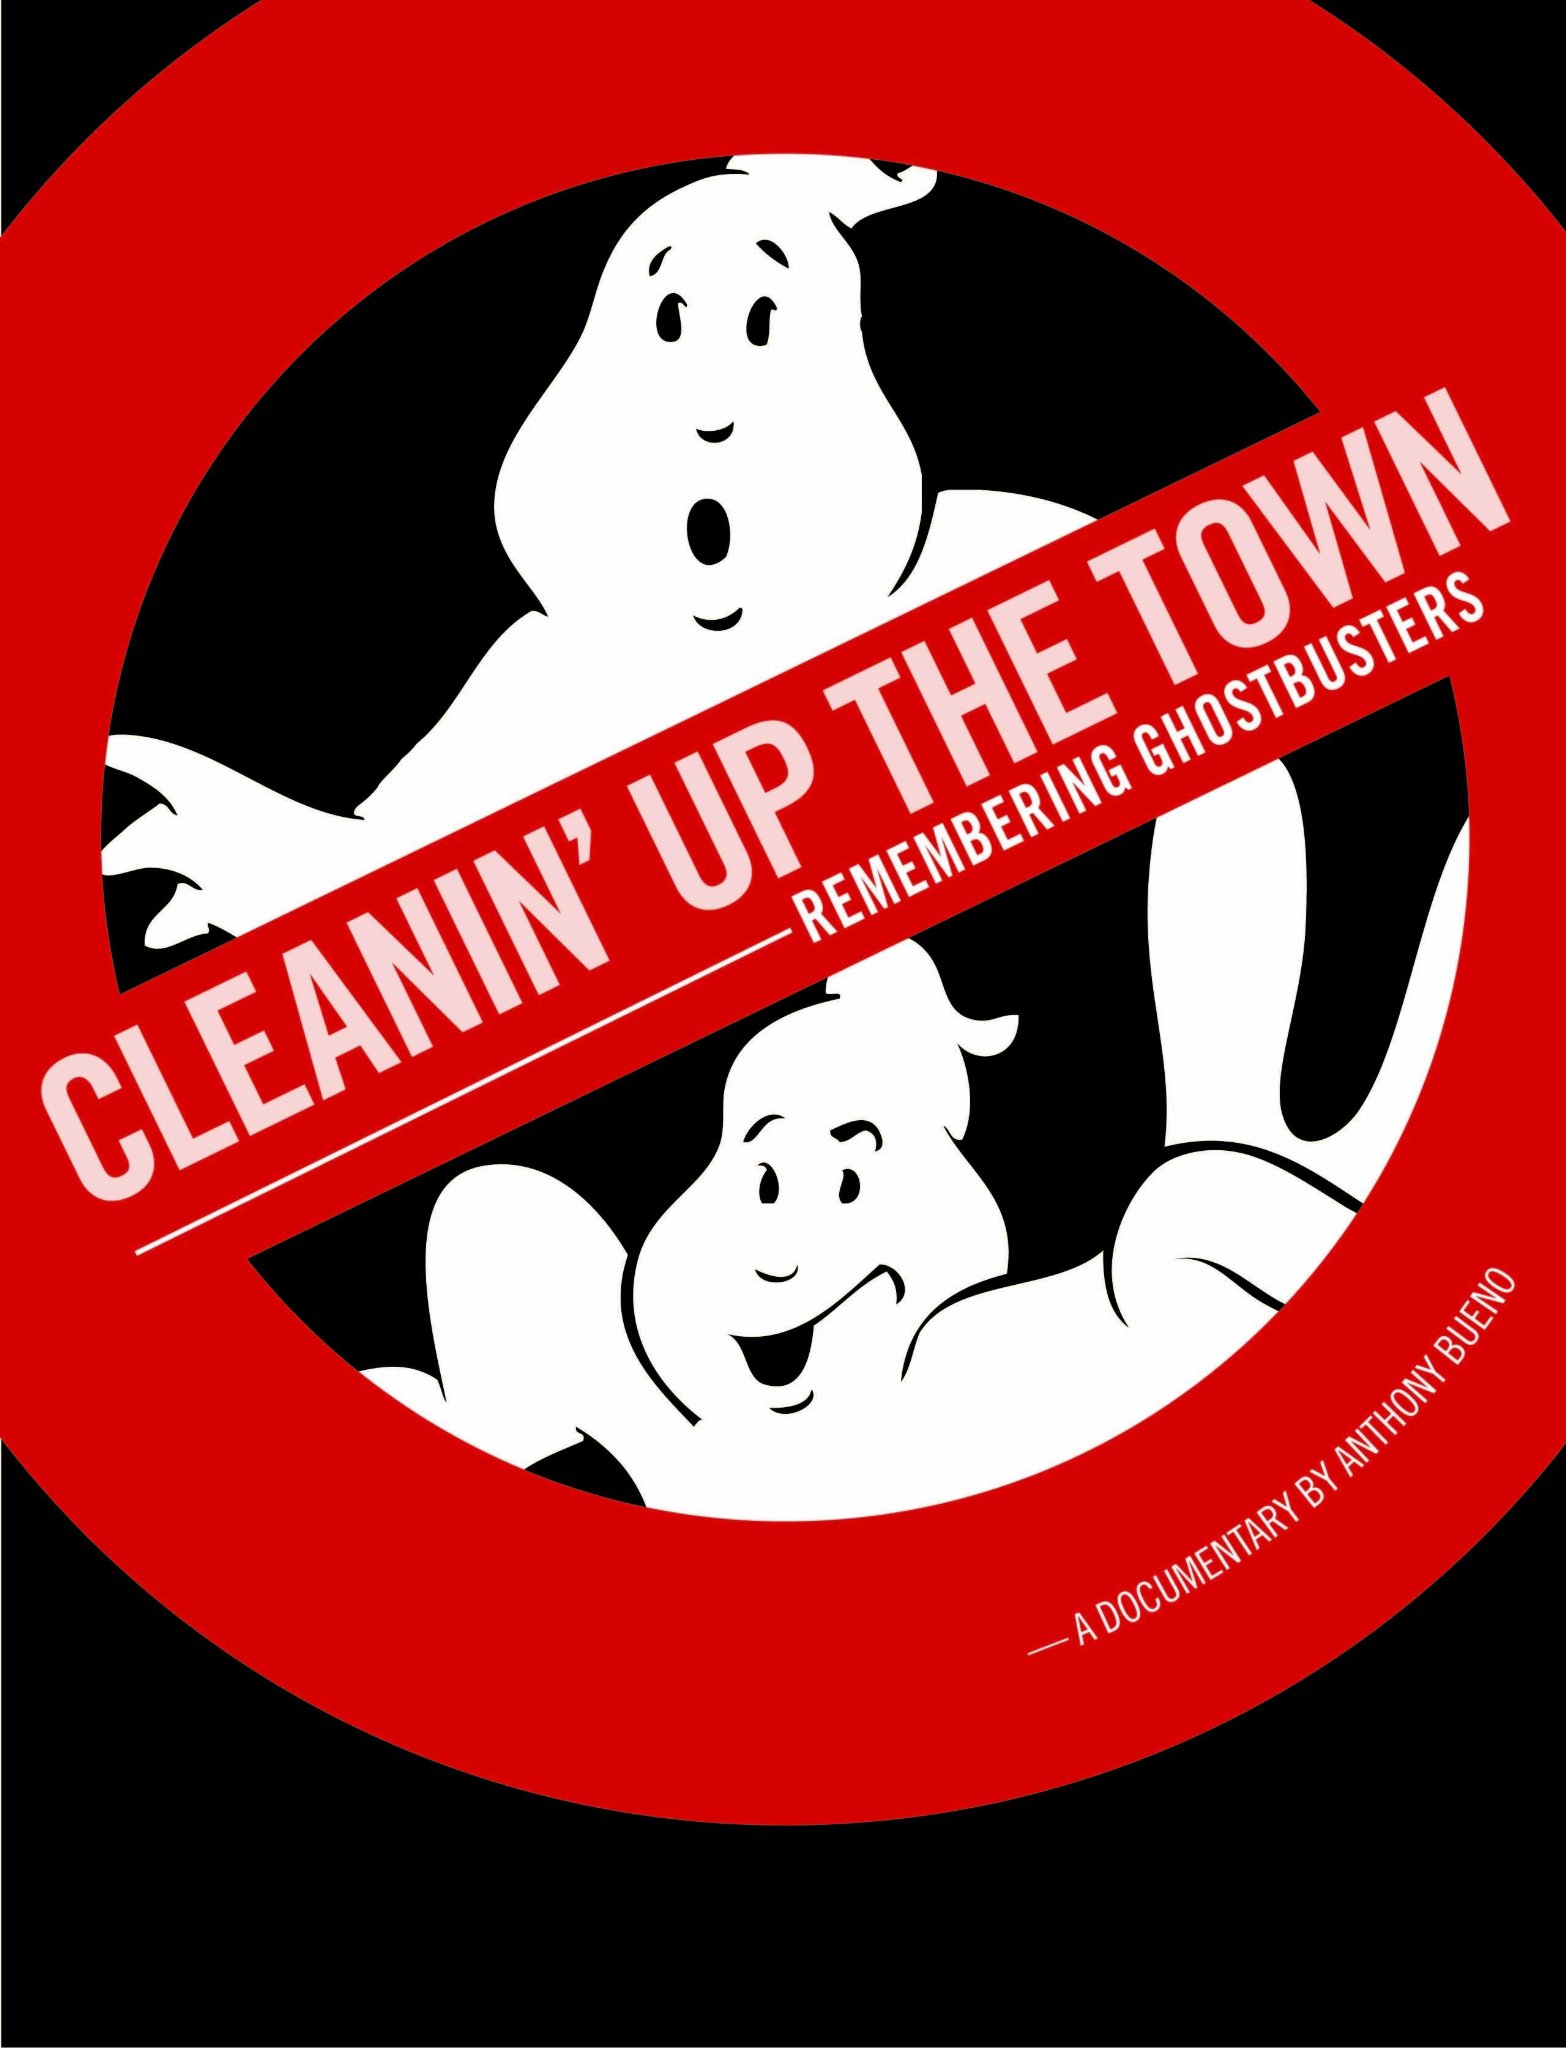 Фото - Cleanin' Up the Town: Remembering Ghostbusters: 1566x2048 / 221 Кб